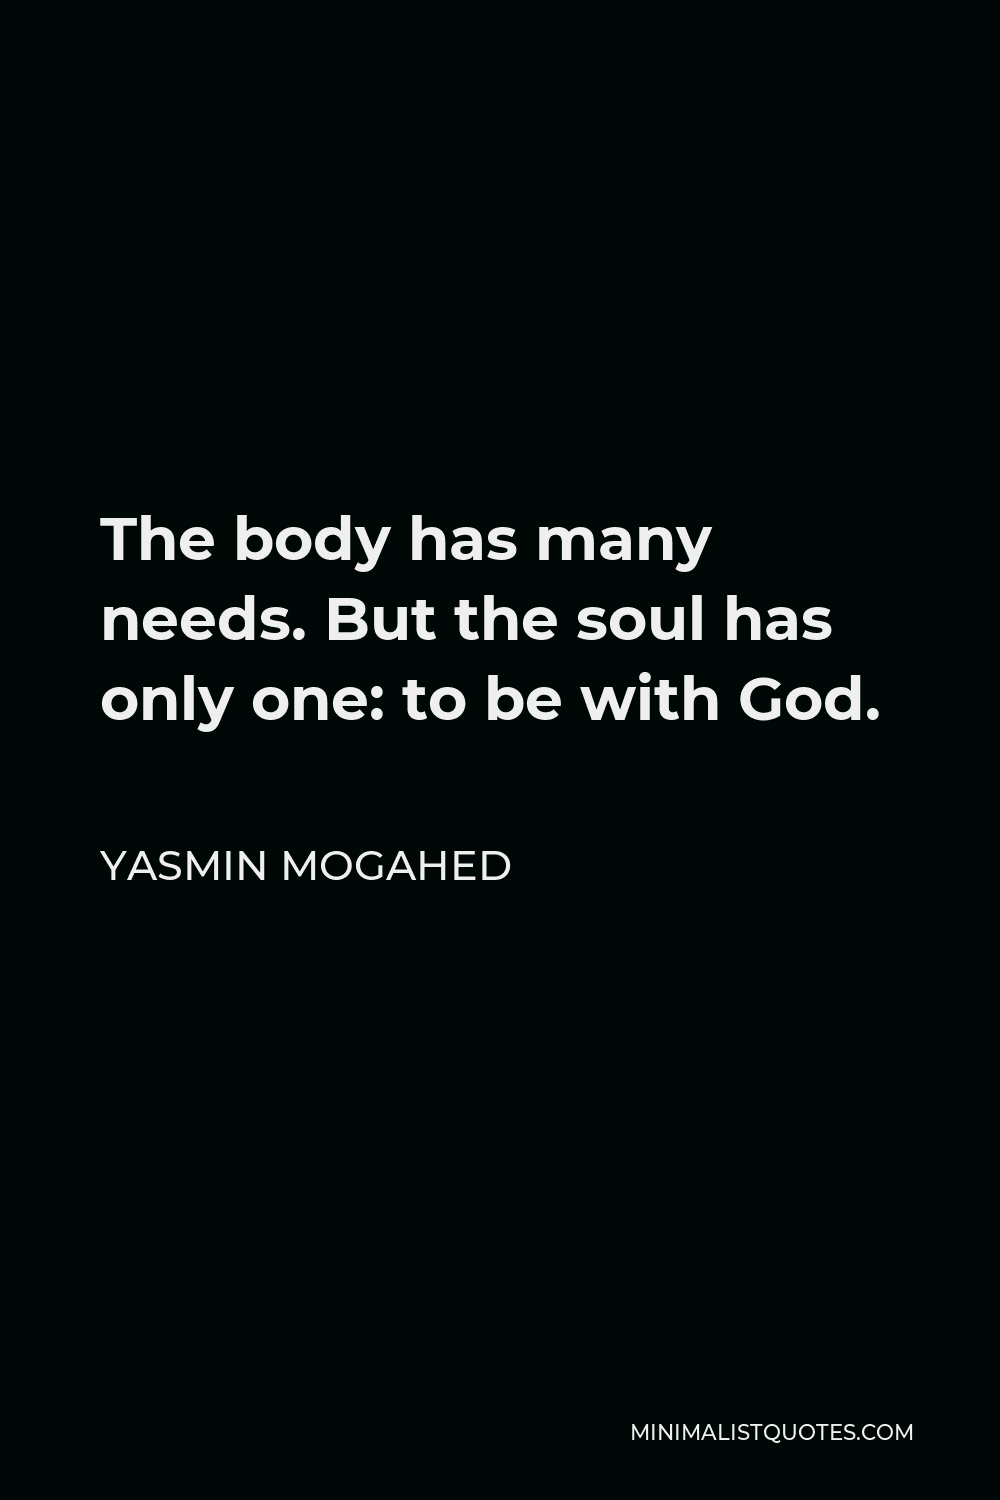 Yasmin Mogahed Quote - The body has many needs. But the soul has only one: to be with God.